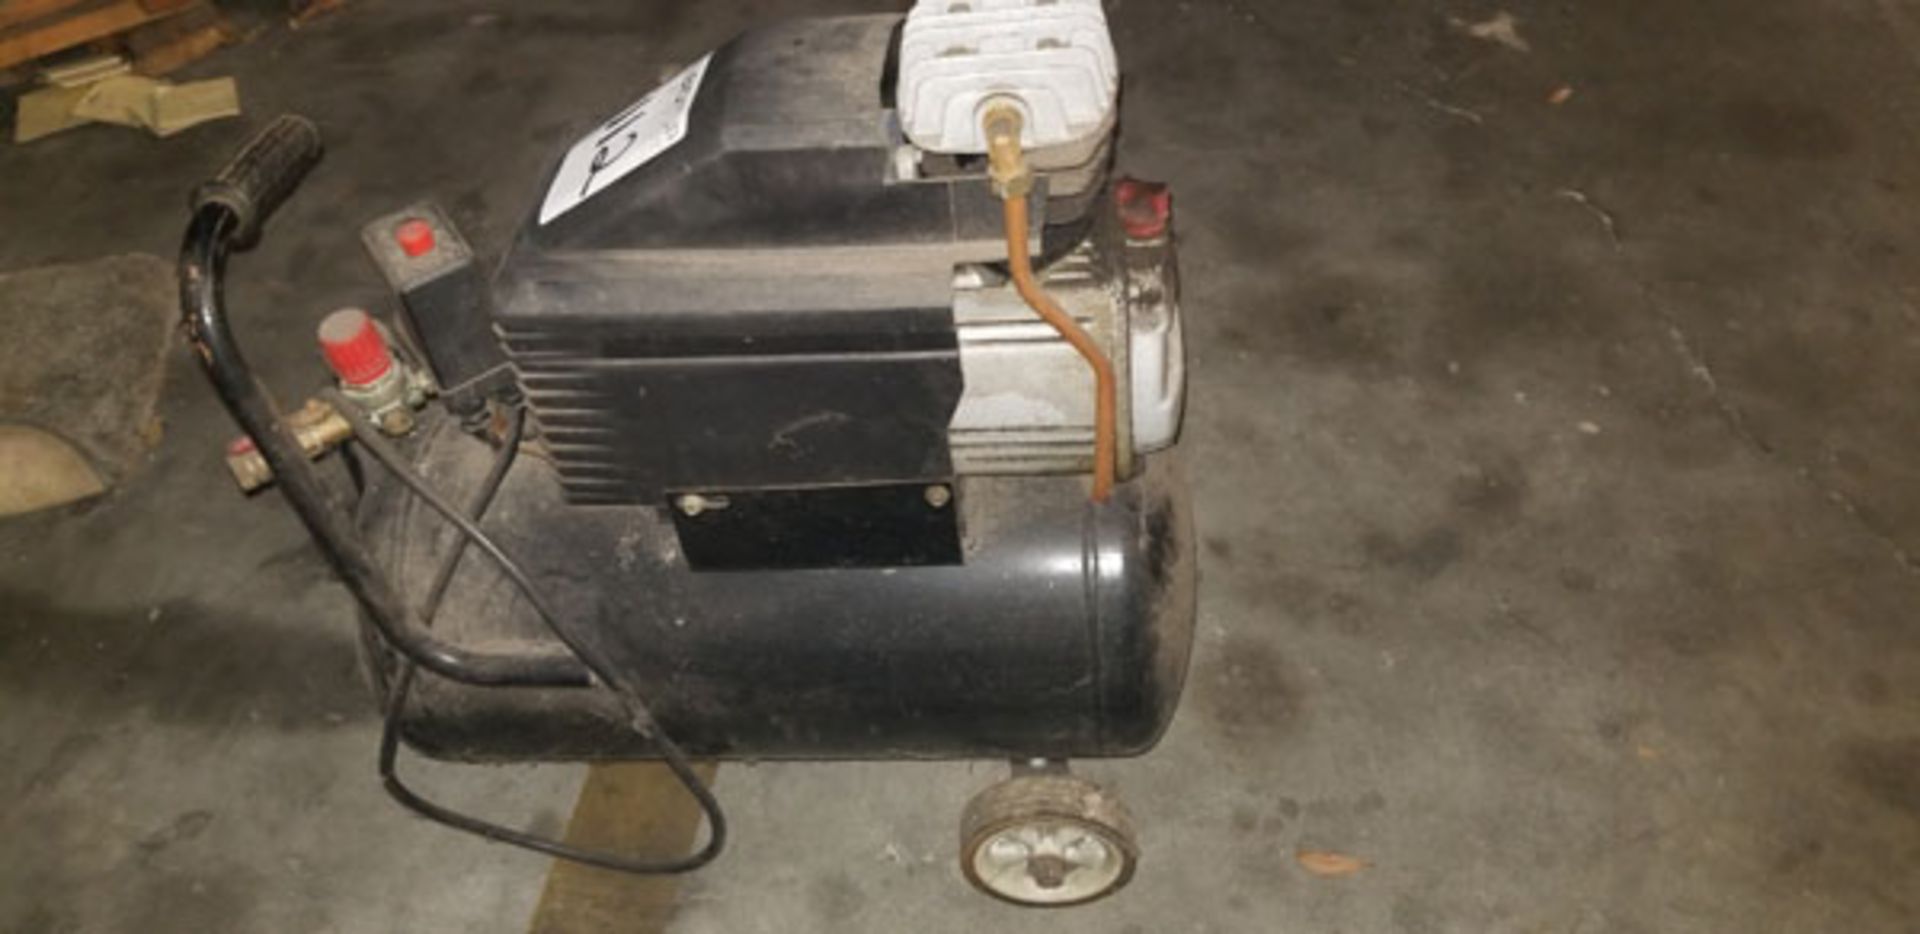 Mille Air Compressor, Wheeled, Located In: 1920 US Highway 301 North, Tampa, FL 33619 - Image 2 of 2